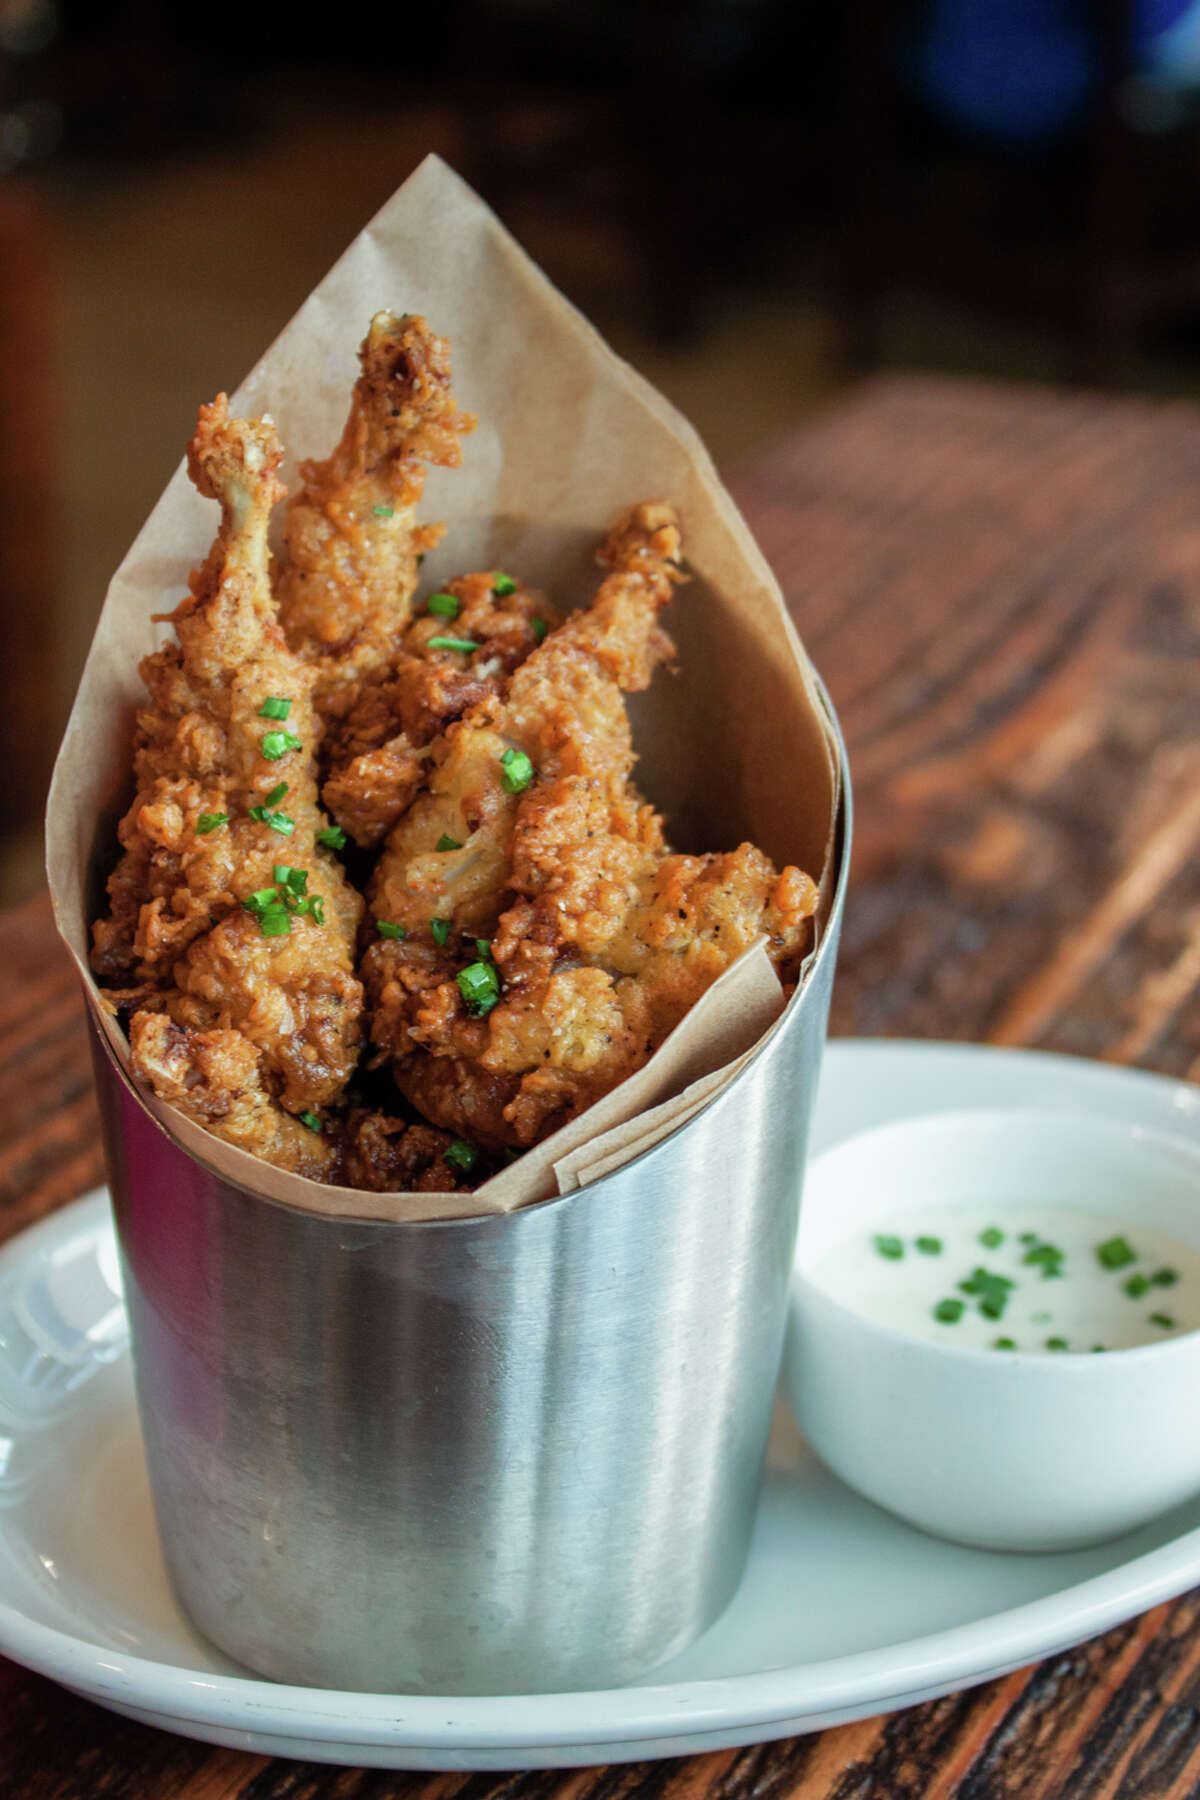 Bowl & Barrel, a bowling and dining experience, is opening at CityCentre, Houston, on Aug. 8. Shown: Hot fried quail.